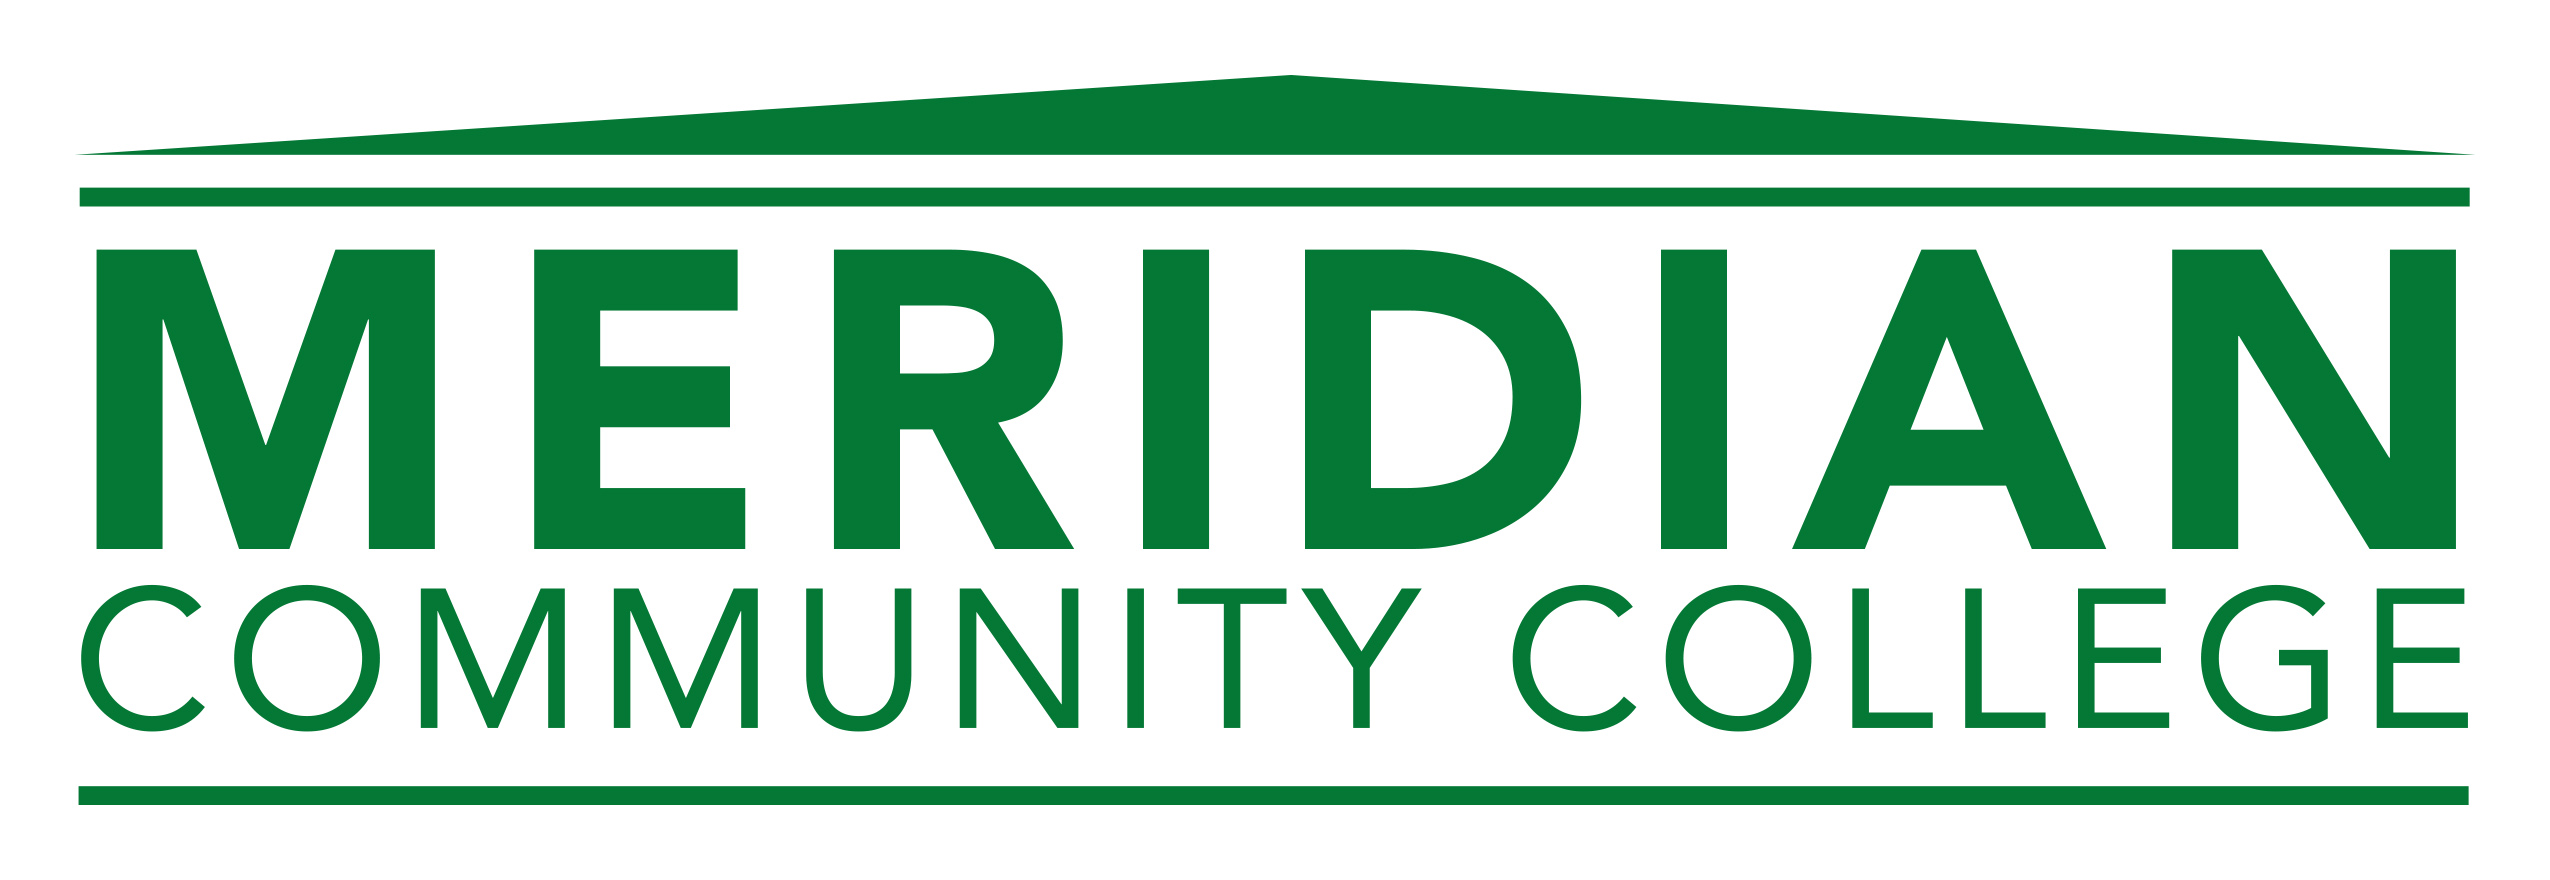 Meridian Community College Logo with grass green house top over text "Meridian Community College"